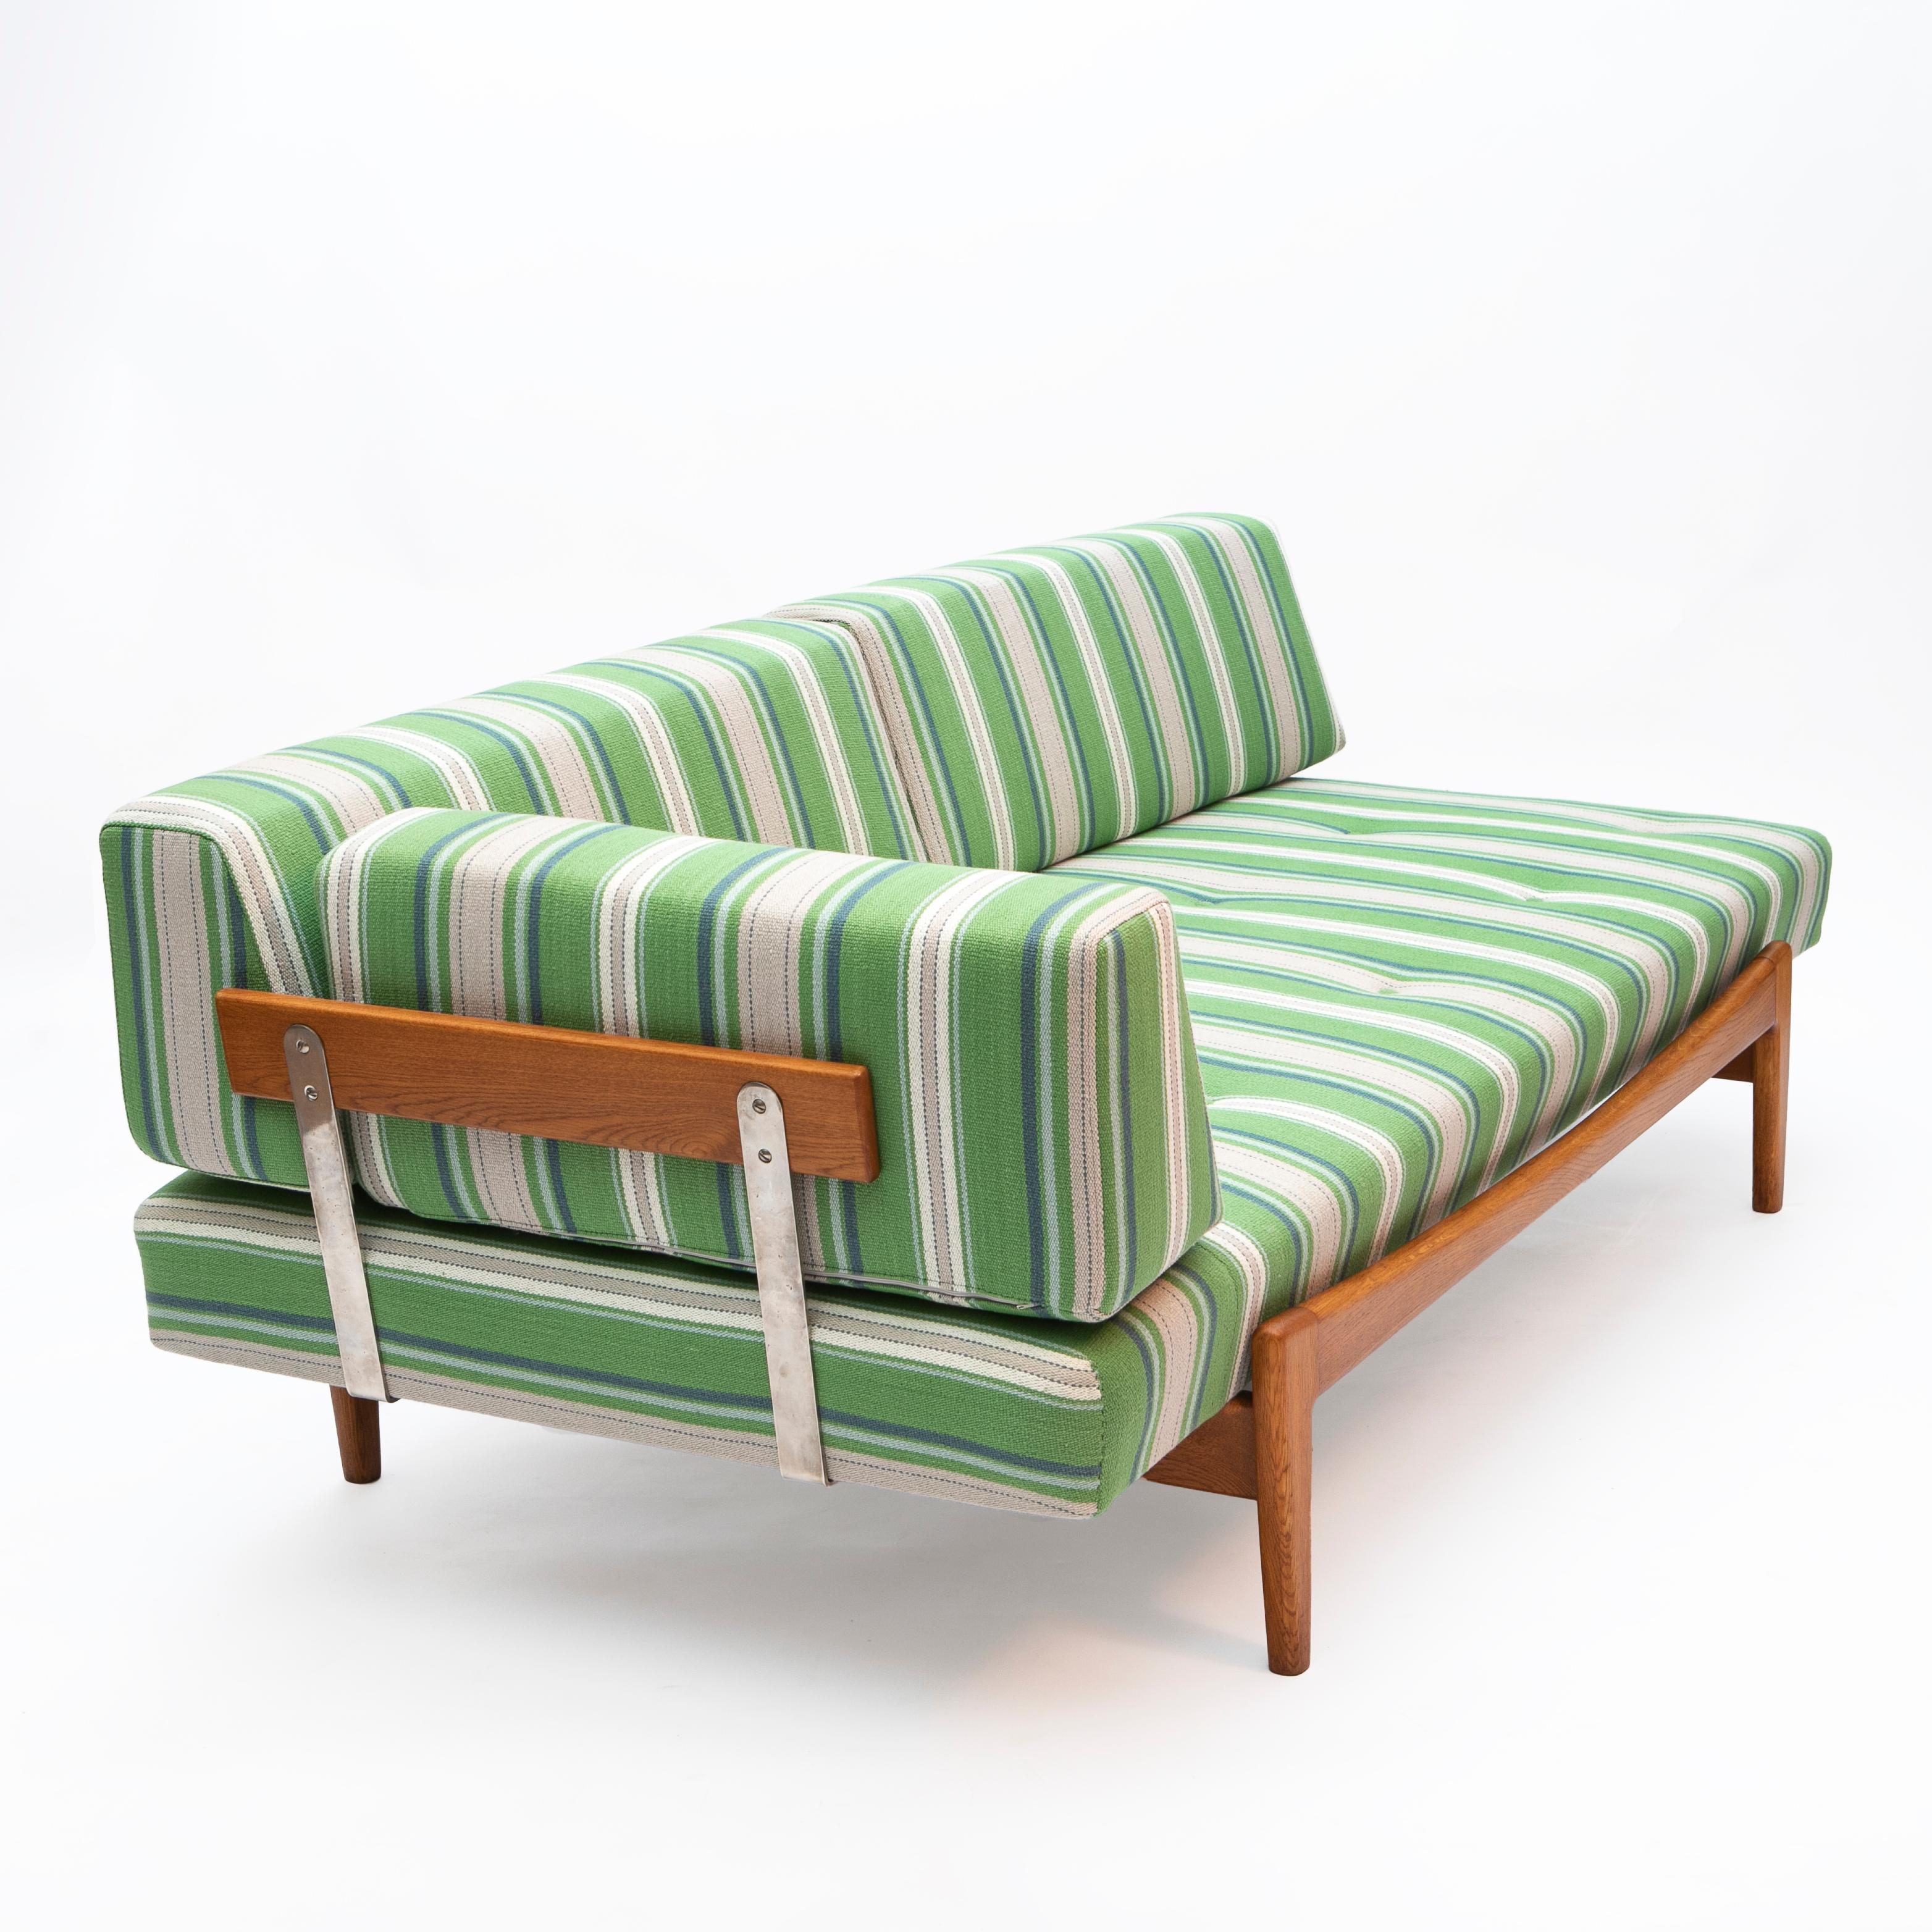 Ib Kofod-Larsen 1922-2003.
Sofa / daybed in solid teak designed by Ib Kofod-Larsen. Produced by Seffle Möbelfabrik in Sweden, 1960s.

The back rest and side rest are supported by steel bars.

Newly upholstered with striped textile from Jane